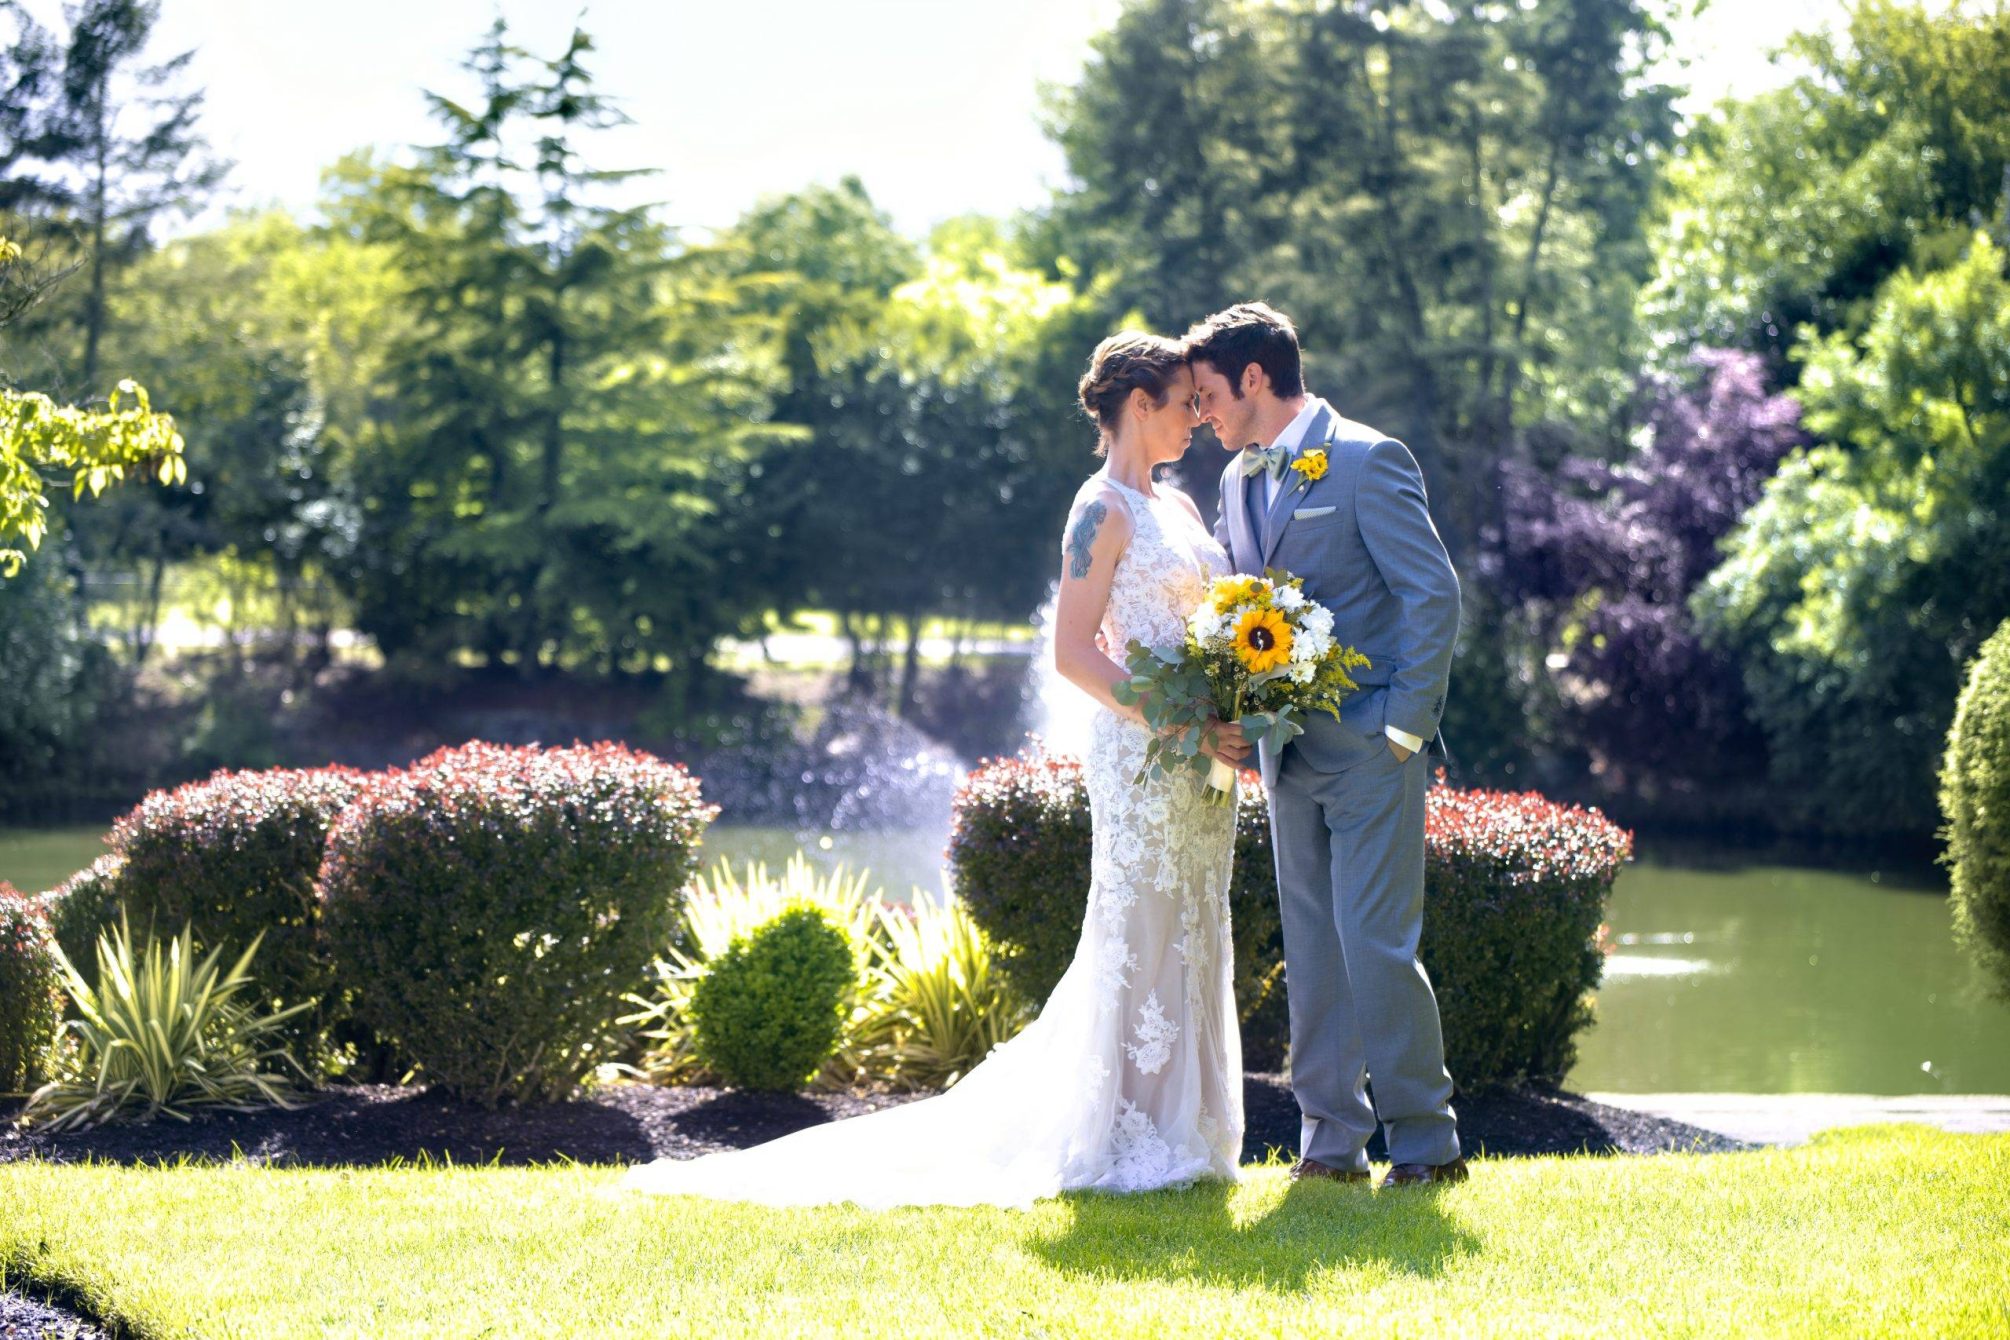 Bridgewater Manor bride and groom in gardens by fountain